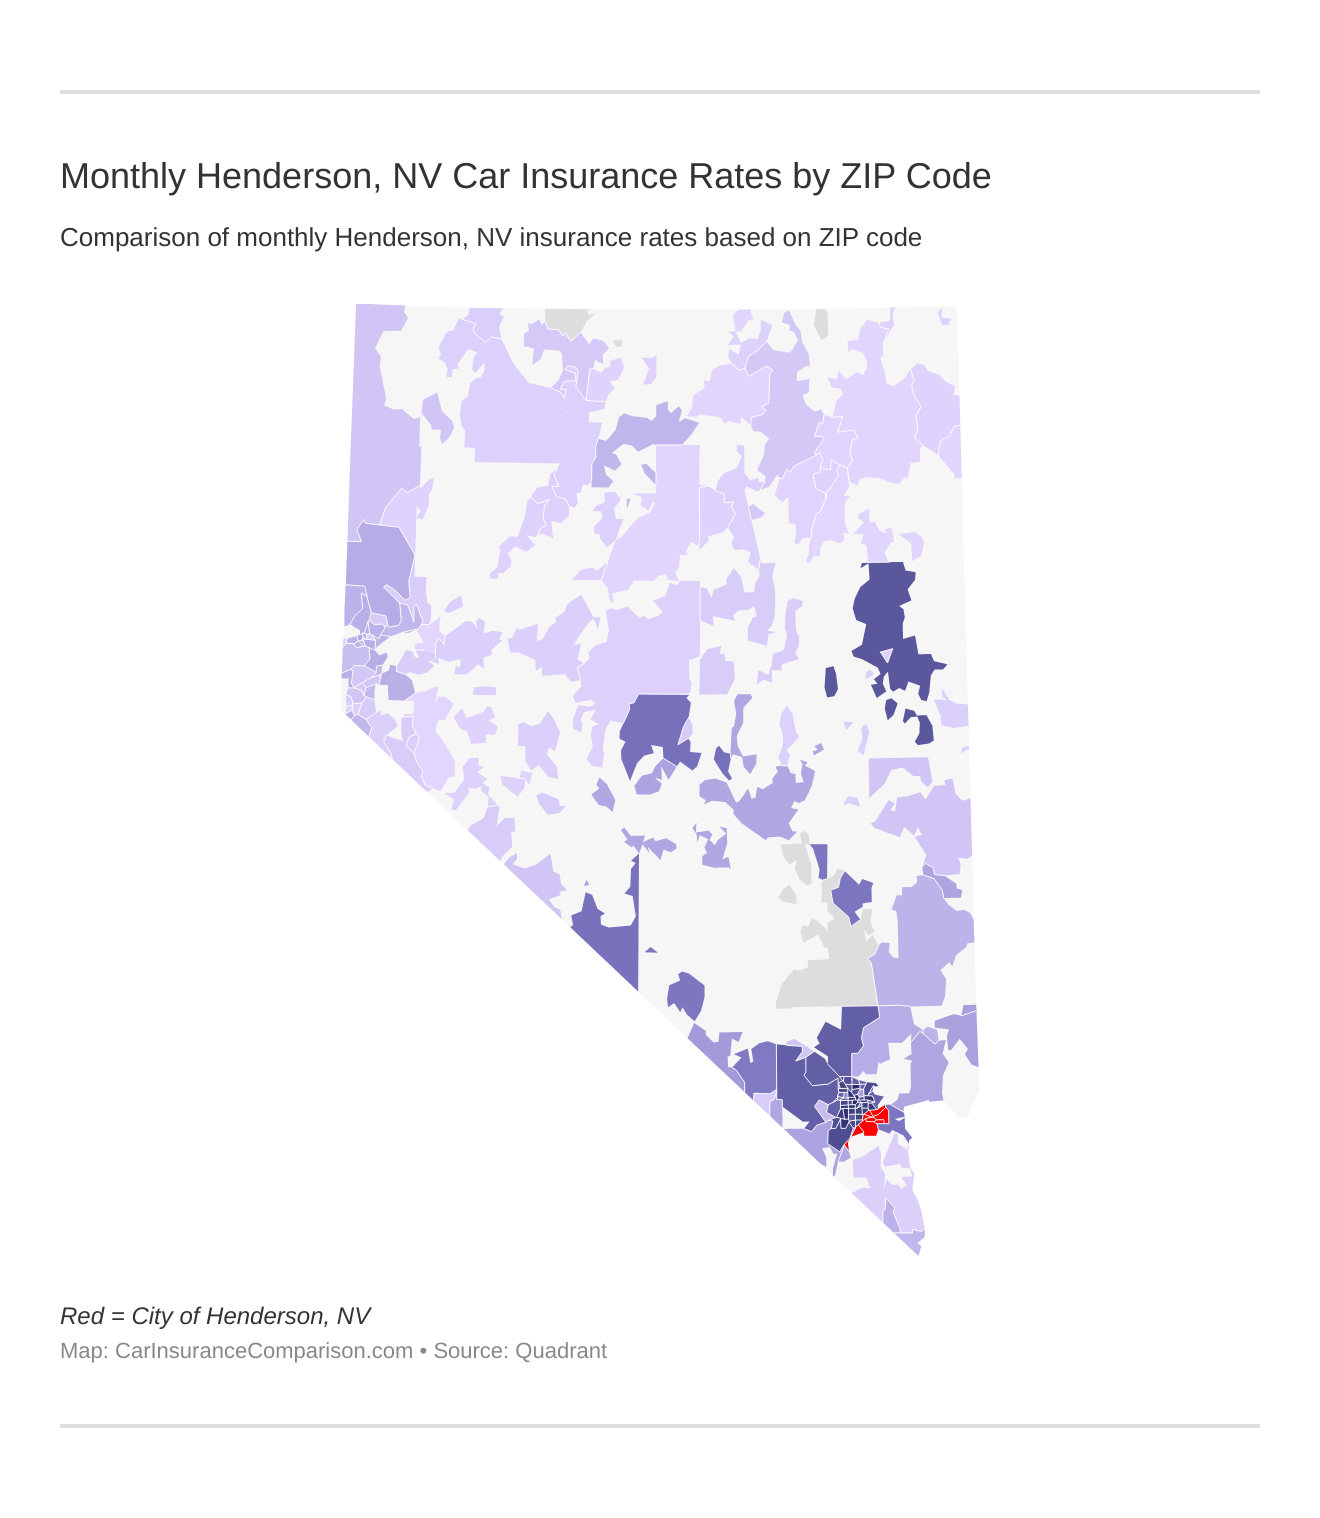 Monthly Henderson, NV Car Insurance Rates by ZIP Code